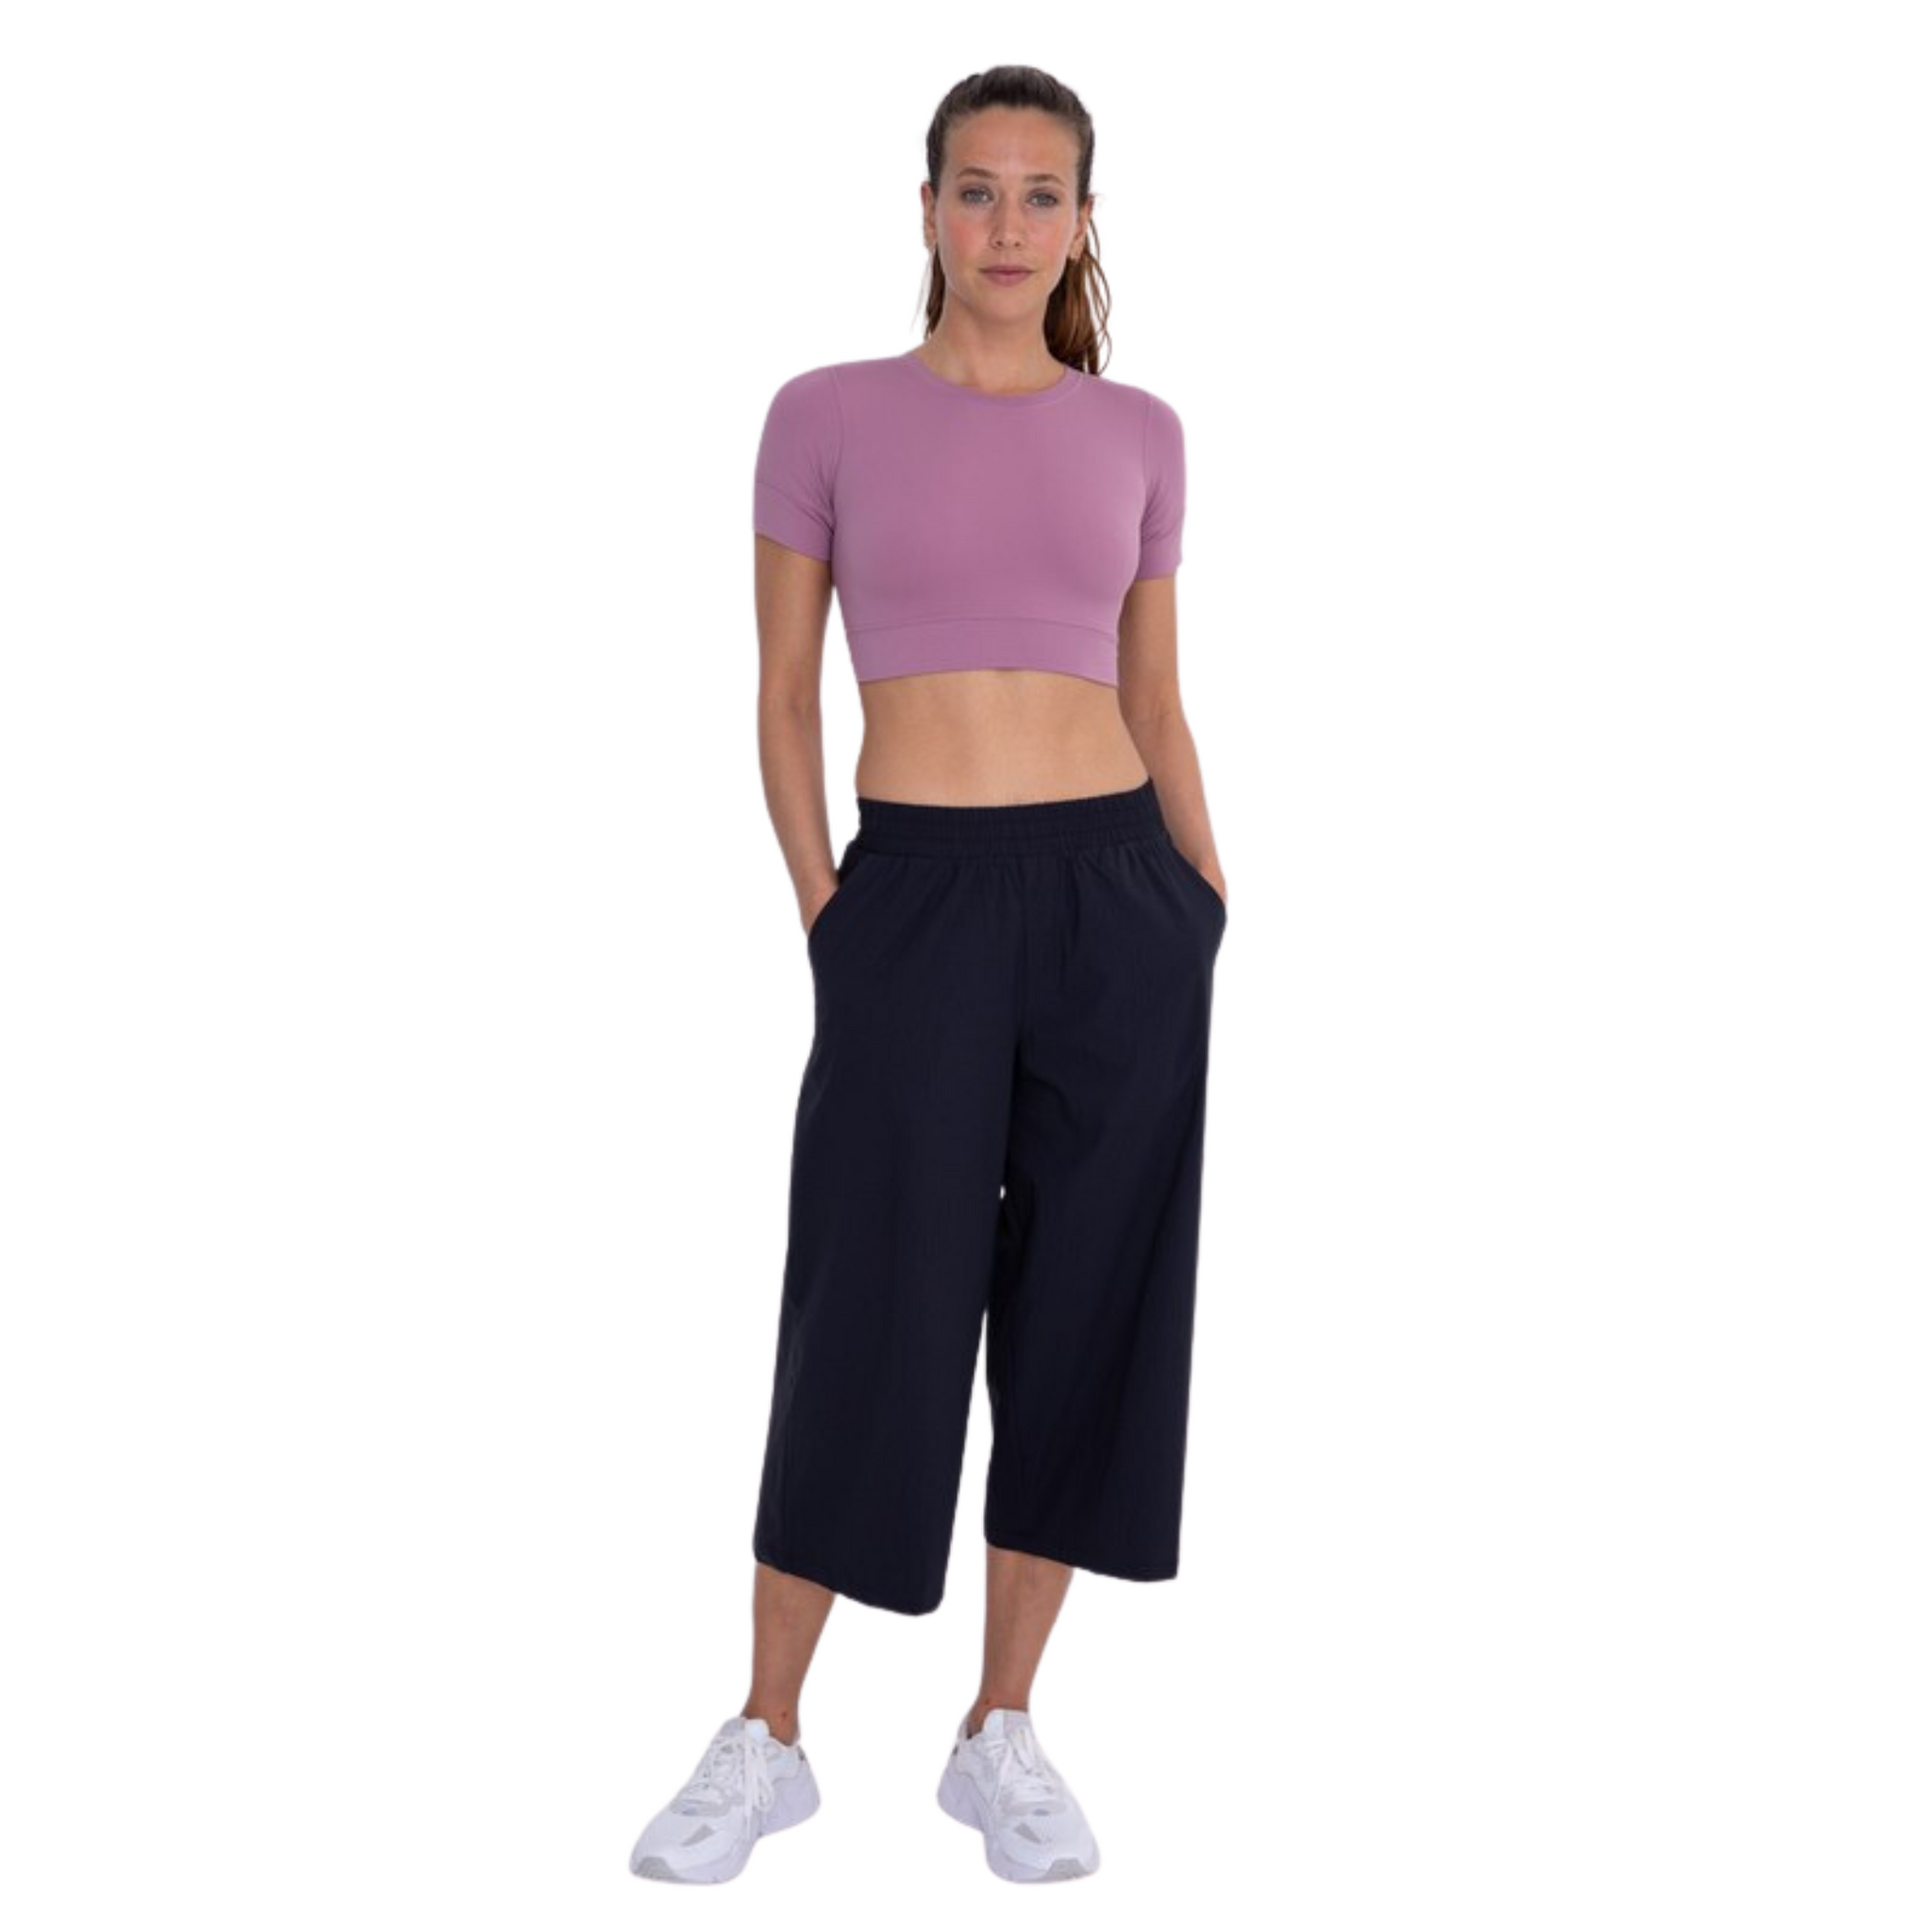 Made from a sturdy stretch rib stop fabric, these Cropped Wide Leg Pants are perfect for everyday wear. The elastic waistband provides a comfortable fit, while the faux fly stitching and slash pockets add subtle style. Plus, they're water-resistant and have a wide, cropped, flared leg for breathability. Enjoy the perfect balance of style and comfort.